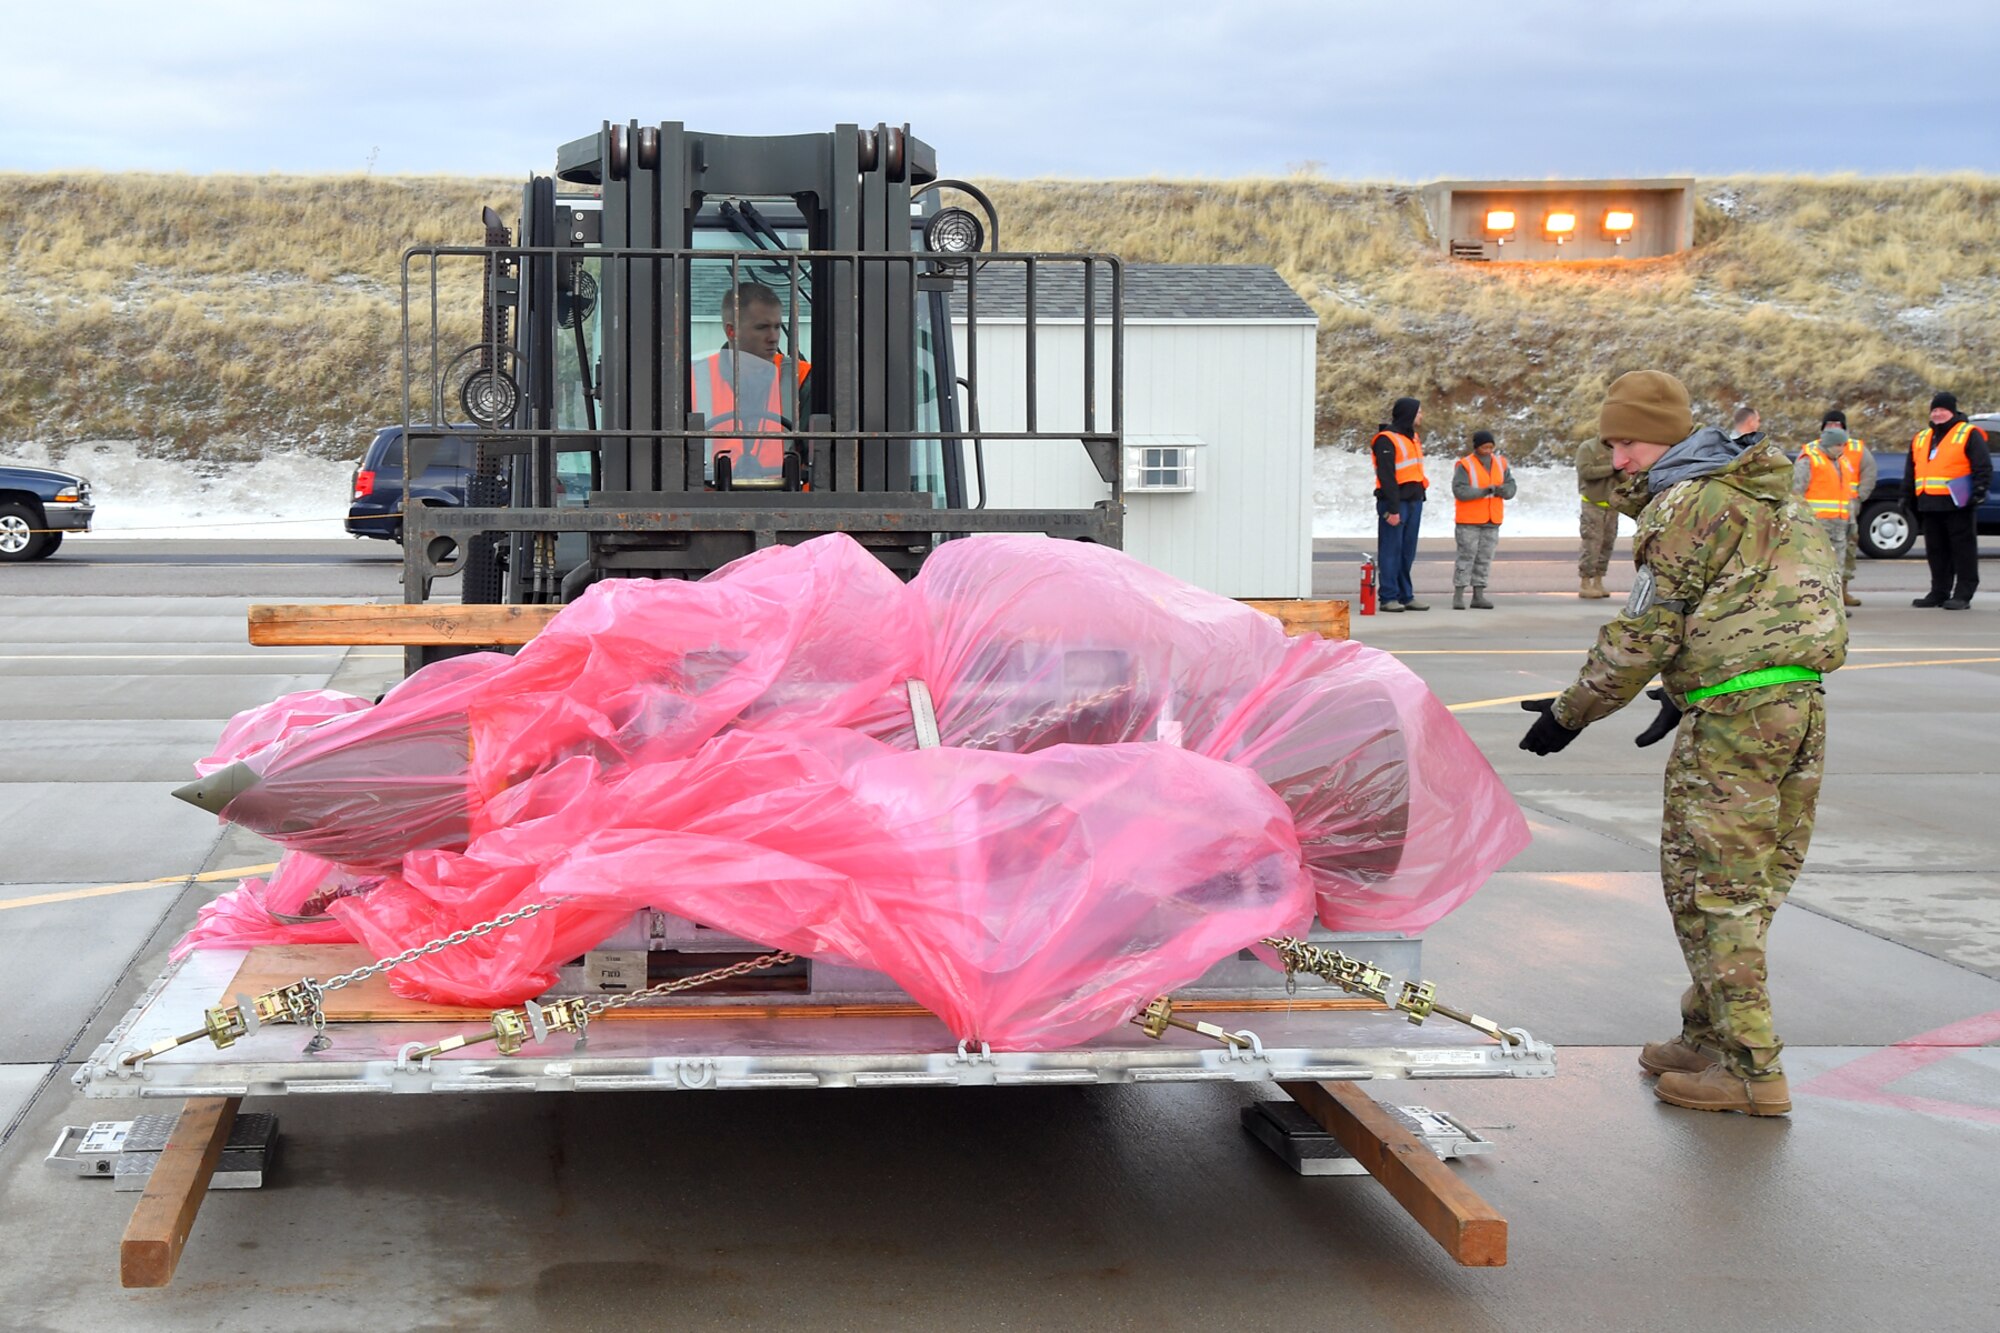 Staff Sgt. Daniel Sargent (right) spots Staff Sgt. Marcus Renfrow, 75th Logistics Readiness Squadron, moving cargo during a readiness exercise, Feb. 5, 2019, at Hill Air Force Base, Utah. During the exercise, Airmen were assessed on performing different tasks to improve their operational readiness. (U.S. Air Force photo by Todd Cromar)